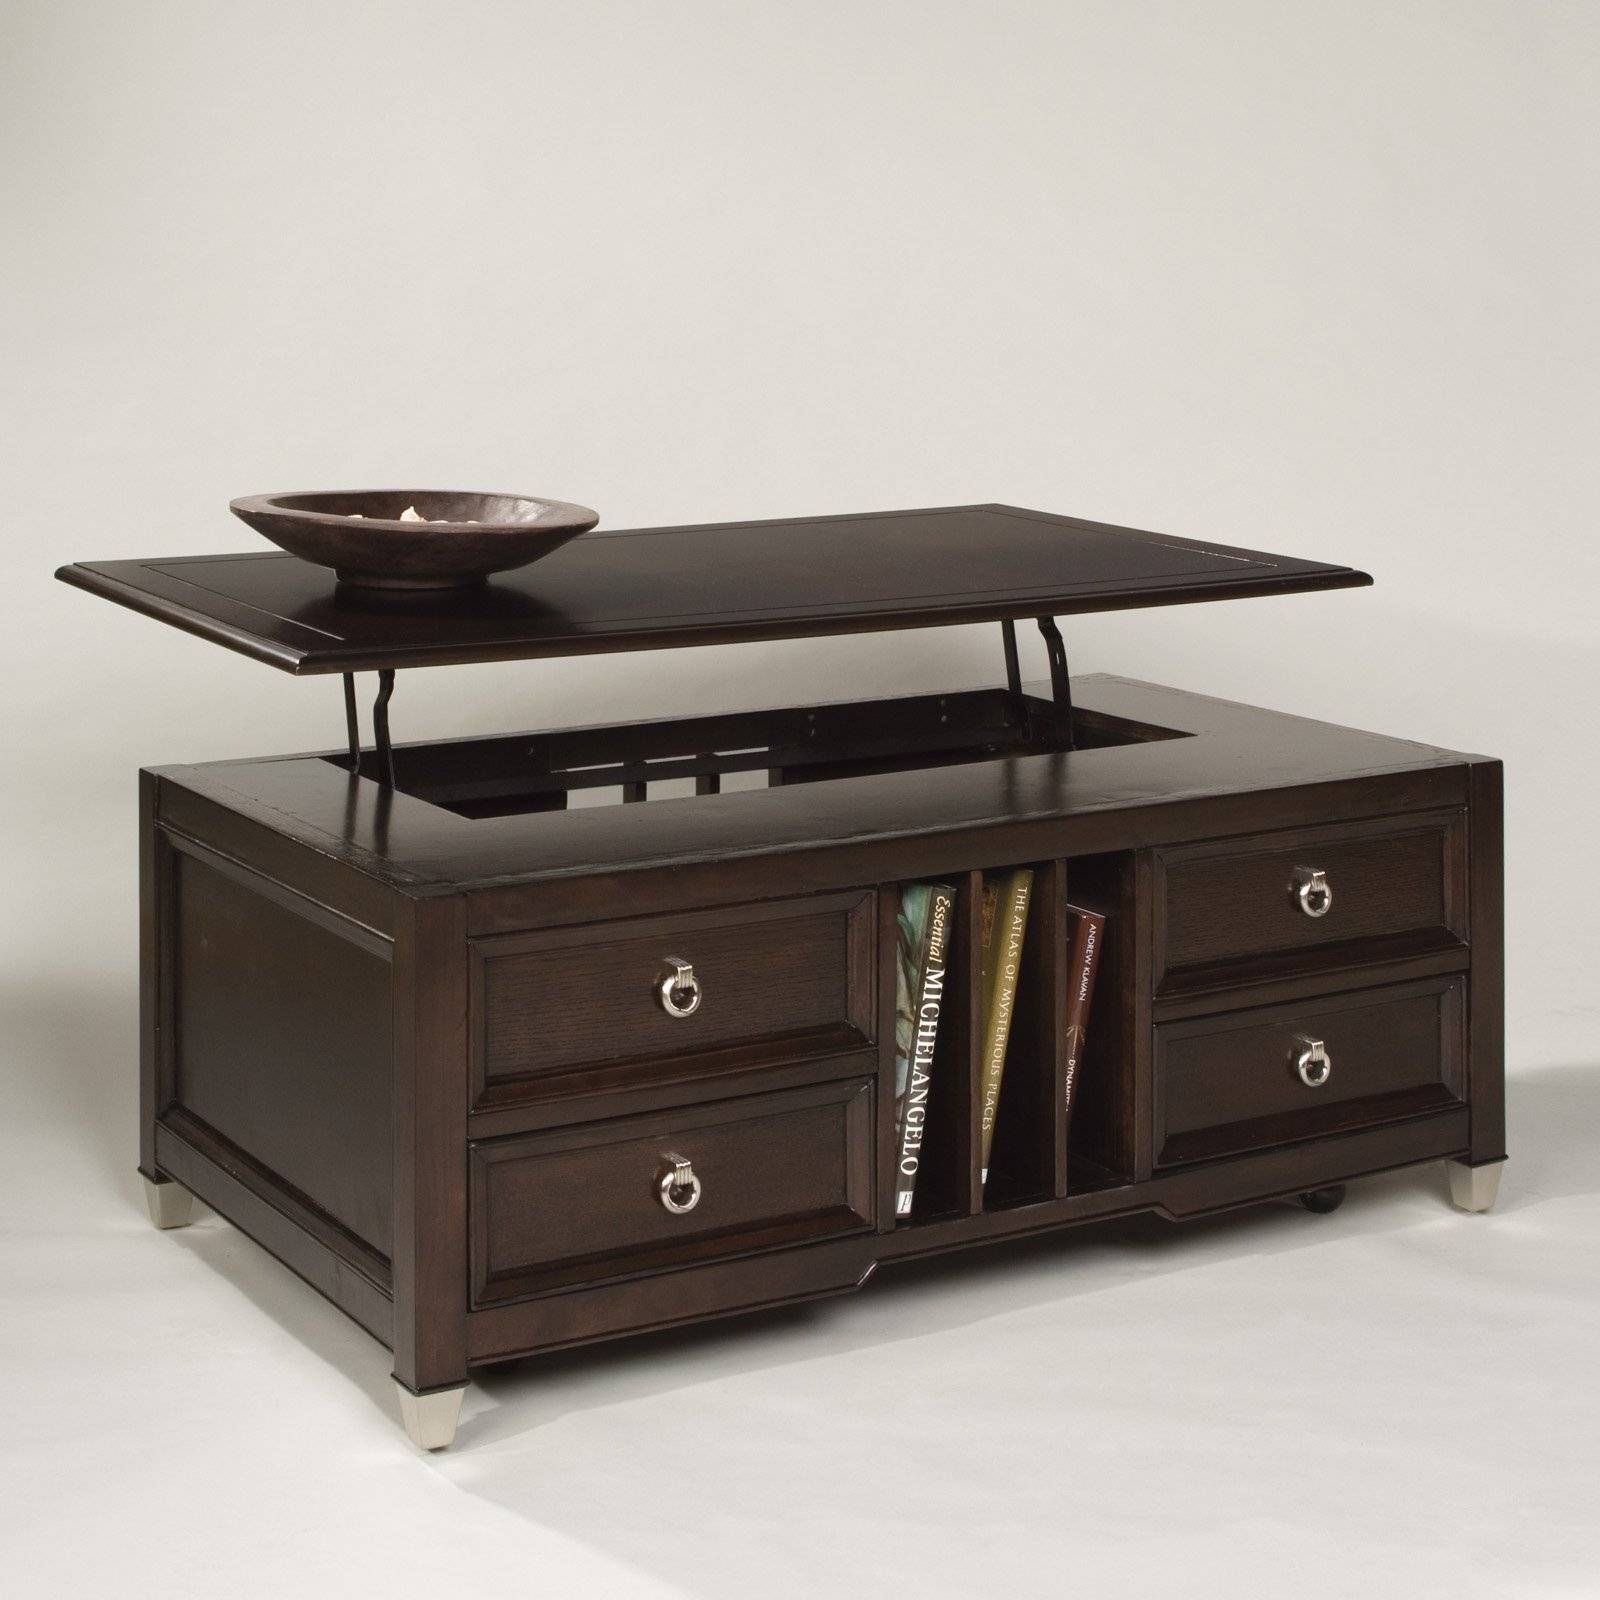 Modern Square Coffee Table With Storage With Trendy Espresso With Regard To Square Coffee Table With Storage Drawers (View 15 of 15)